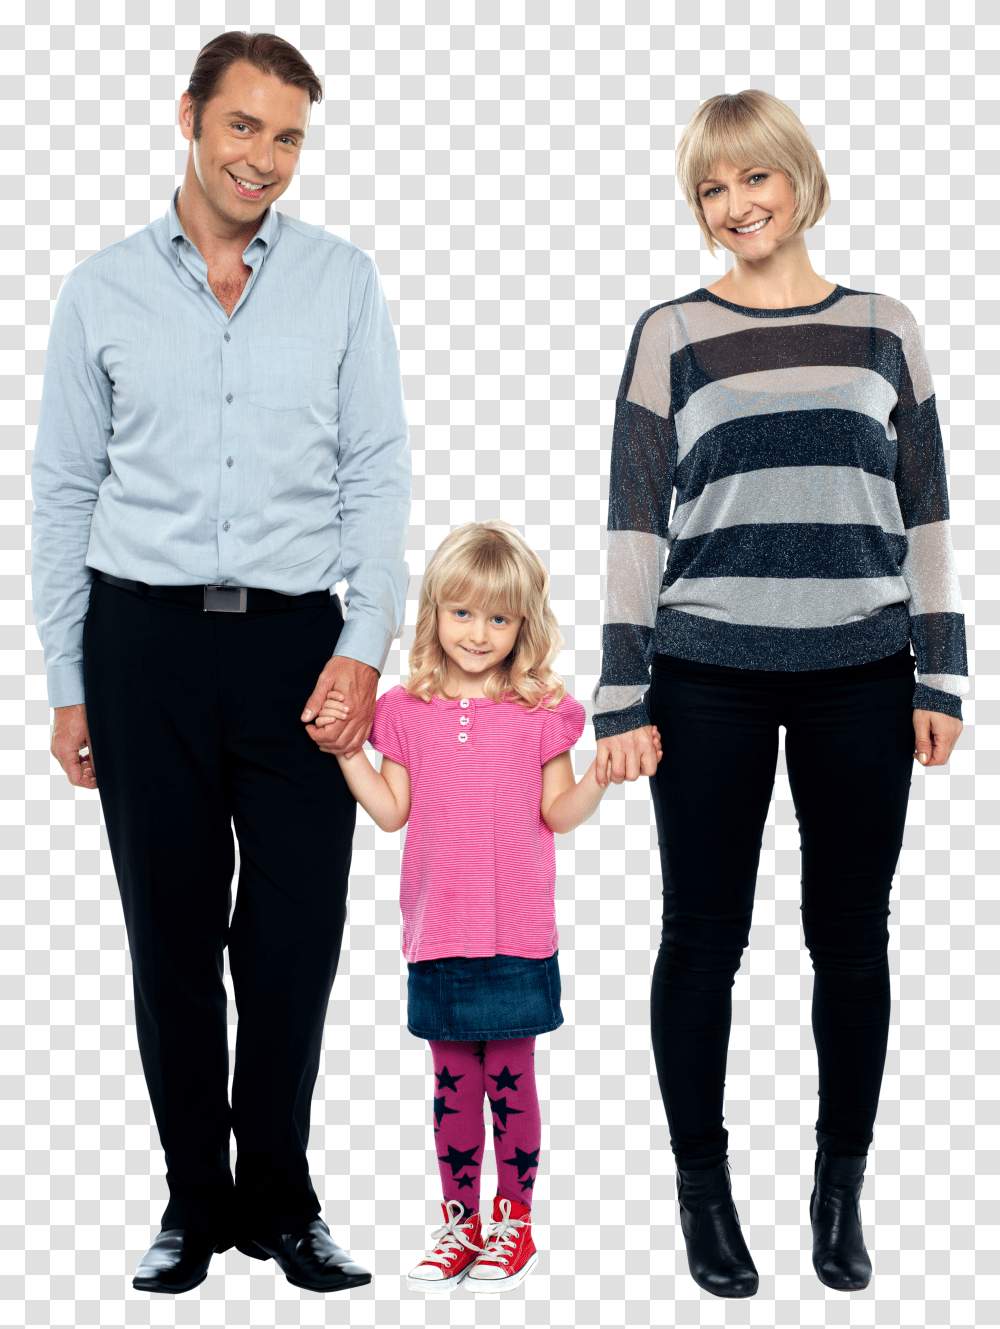 Images Background Holding Hands With Parents Transparent Png